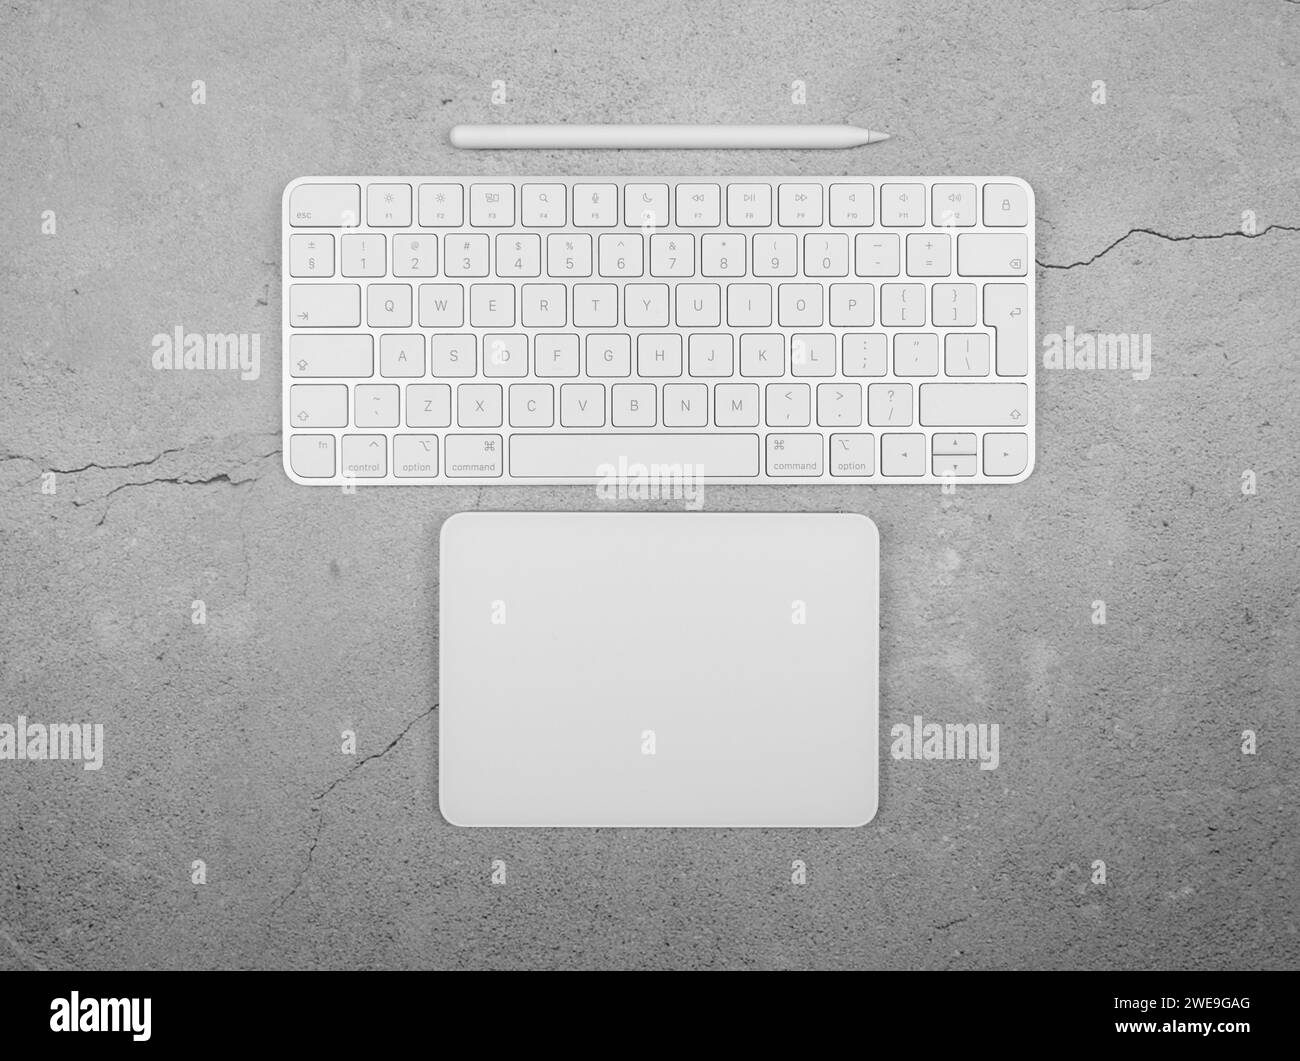 Top view of white keyboard, touchpad and pen on concrete background. Modern office flat lay, copy space. Stock Photo